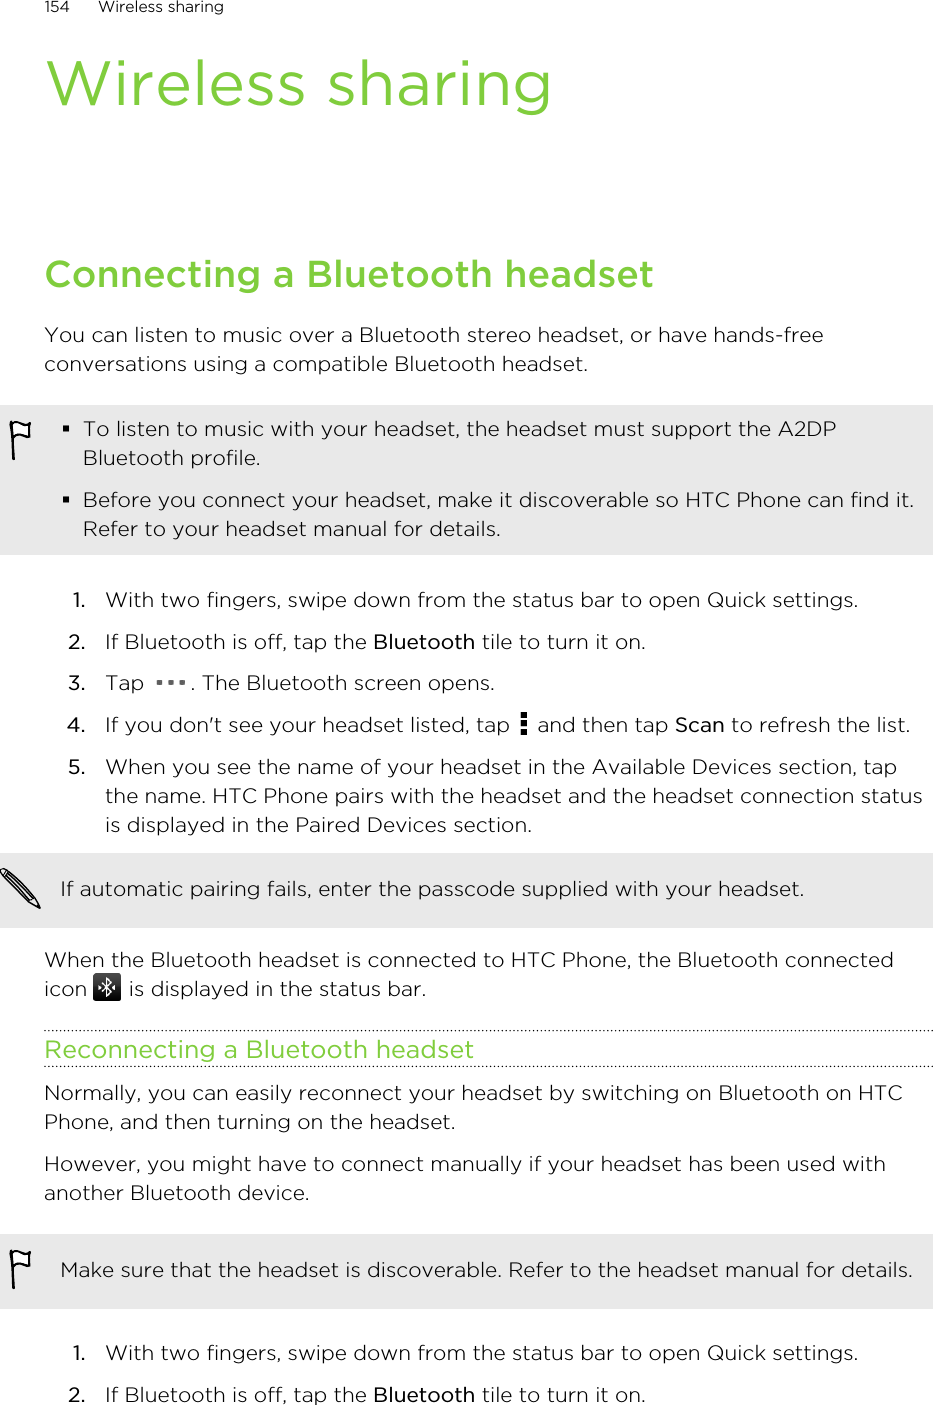 Wireless sharingConnecting a Bluetooth headsetYou can listen to music over a Bluetooth stereo headset, or have hands-freeconversations using a compatible Bluetooth headset.§To listen to music with your headset, the headset must support the A2DPBluetooth profile.§Before you connect your headset, make it discoverable so HTC Phone can find it.Refer to your headset manual for details.1. With two fingers, swipe down from the status bar to open Quick settings.2. If Bluetooth is off, tap the Bluetooth tile to turn it on.3. Tap  . The Bluetooth screen opens.4. If you don&apos;t see your headset listed, tap   and then tap Scan to refresh the list.5. When you see the name of your headset in the Available Devices section, tapthe name. HTC Phone pairs with the headset and the headset connection statusis displayed in the Paired Devices section.If automatic pairing fails, enter the passcode supplied with your headset.When the Bluetooth headset is connected to HTC Phone, the Bluetooth connectedicon   is displayed in the status bar.Reconnecting a Bluetooth headsetNormally, you can easily reconnect your headset by switching on Bluetooth on HTCPhone, and then turning on the headset.However, you might have to connect manually if your headset has been used withanother Bluetooth device.Make sure that the headset is discoverable. Refer to the headset manual for details.1. With two fingers, swipe down from the status bar to open Quick settings.2. If Bluetooth is off, tap the Bluetooth tile to turn it on.154 Wireless sharingHTC Confidential for Certification HTC Confidential for Certification